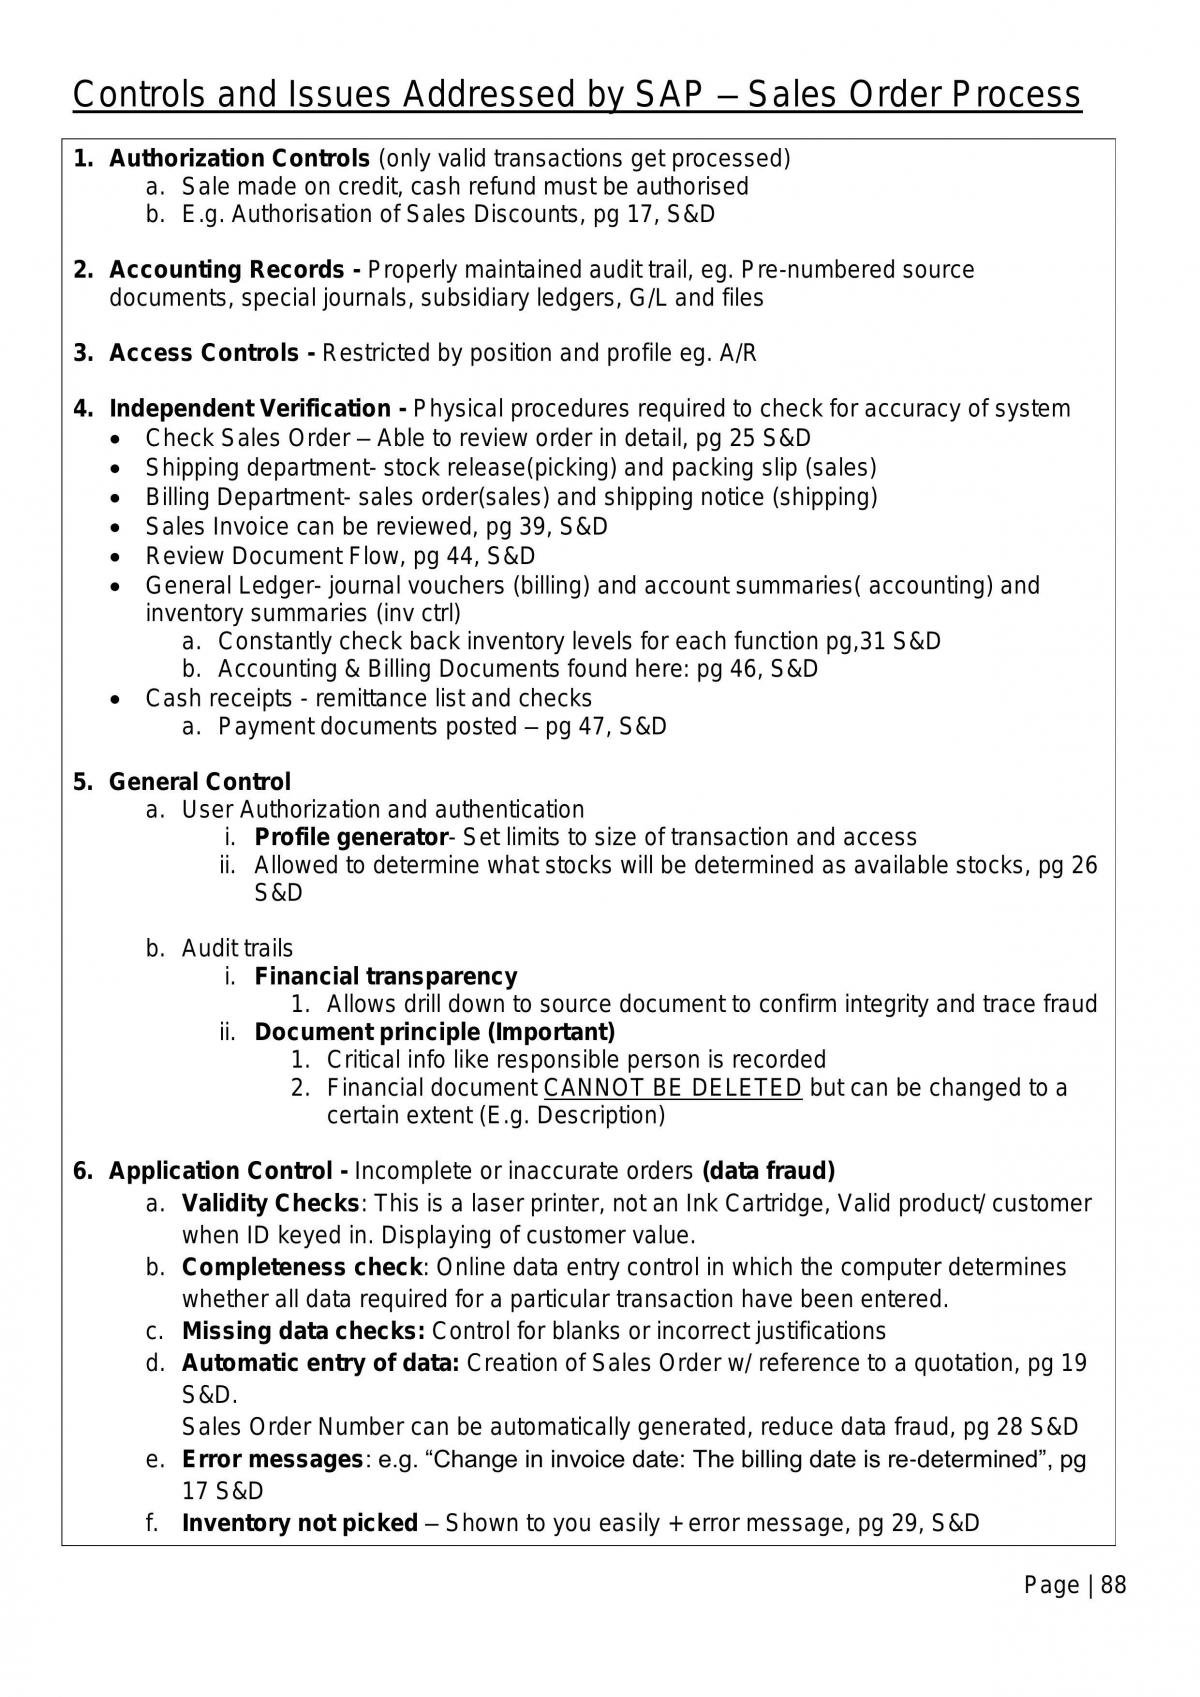 Complete study notes for AC2401 - Page 88